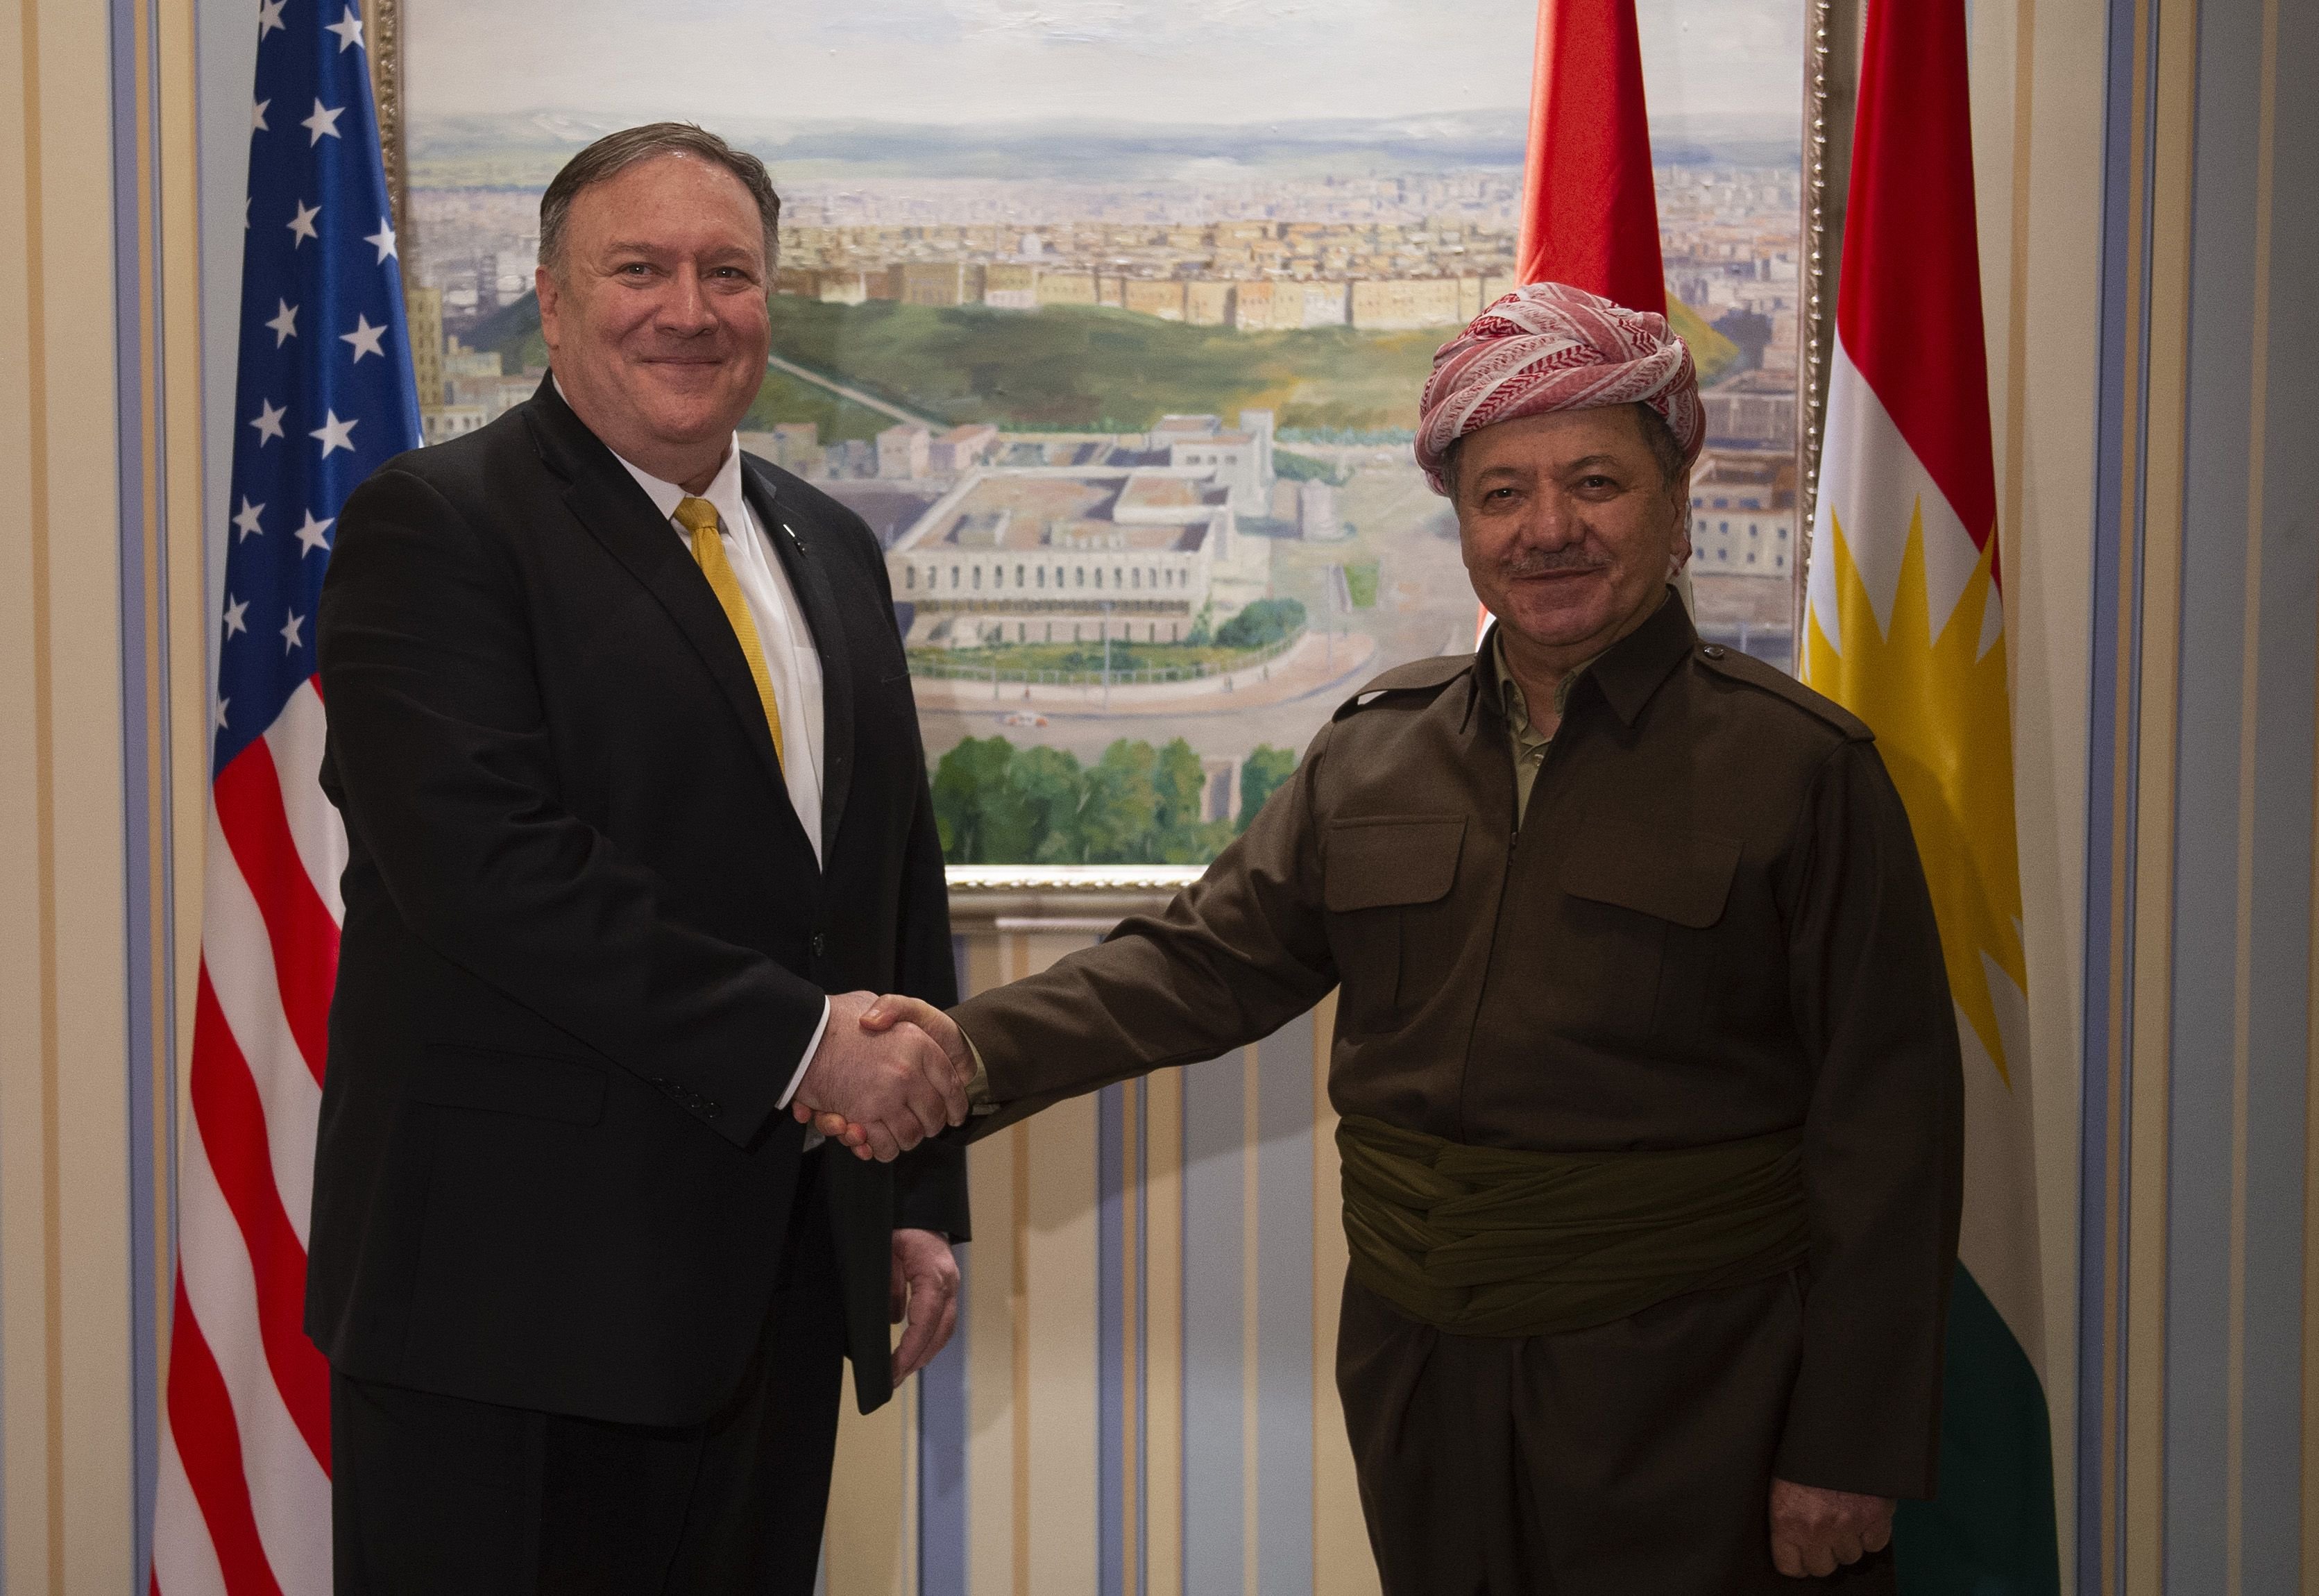 US Secretary of State Mike Pompeo (L) meets with Masoud Barzani leader of the Kurdistan Democratic Party (KDP) in the province's capital Arbil during a Middle East tour, on January 9, 2019. - The eight-day tour comes weeks after the US President announced that the United States would quickly pull its 2,000 soldiers out of Syria, declaring that IS -- also known as ISIS -- had been defeated. (Photo by Andrew CABALLERO-REYNOLDS / AFP) 